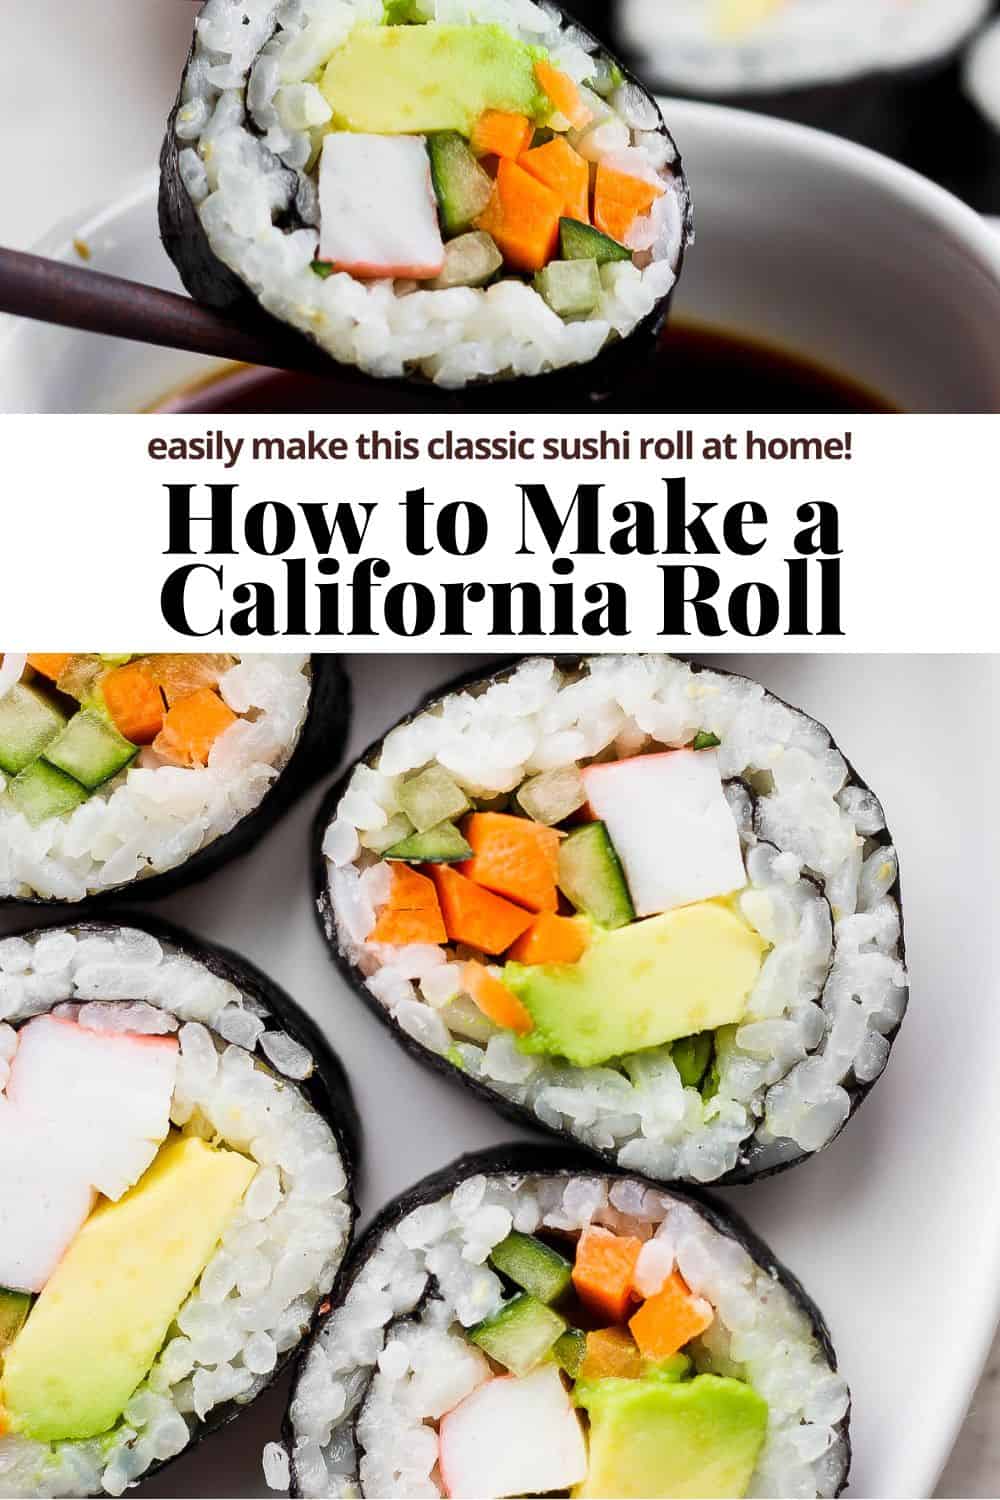 Pinterest image for a California roll.